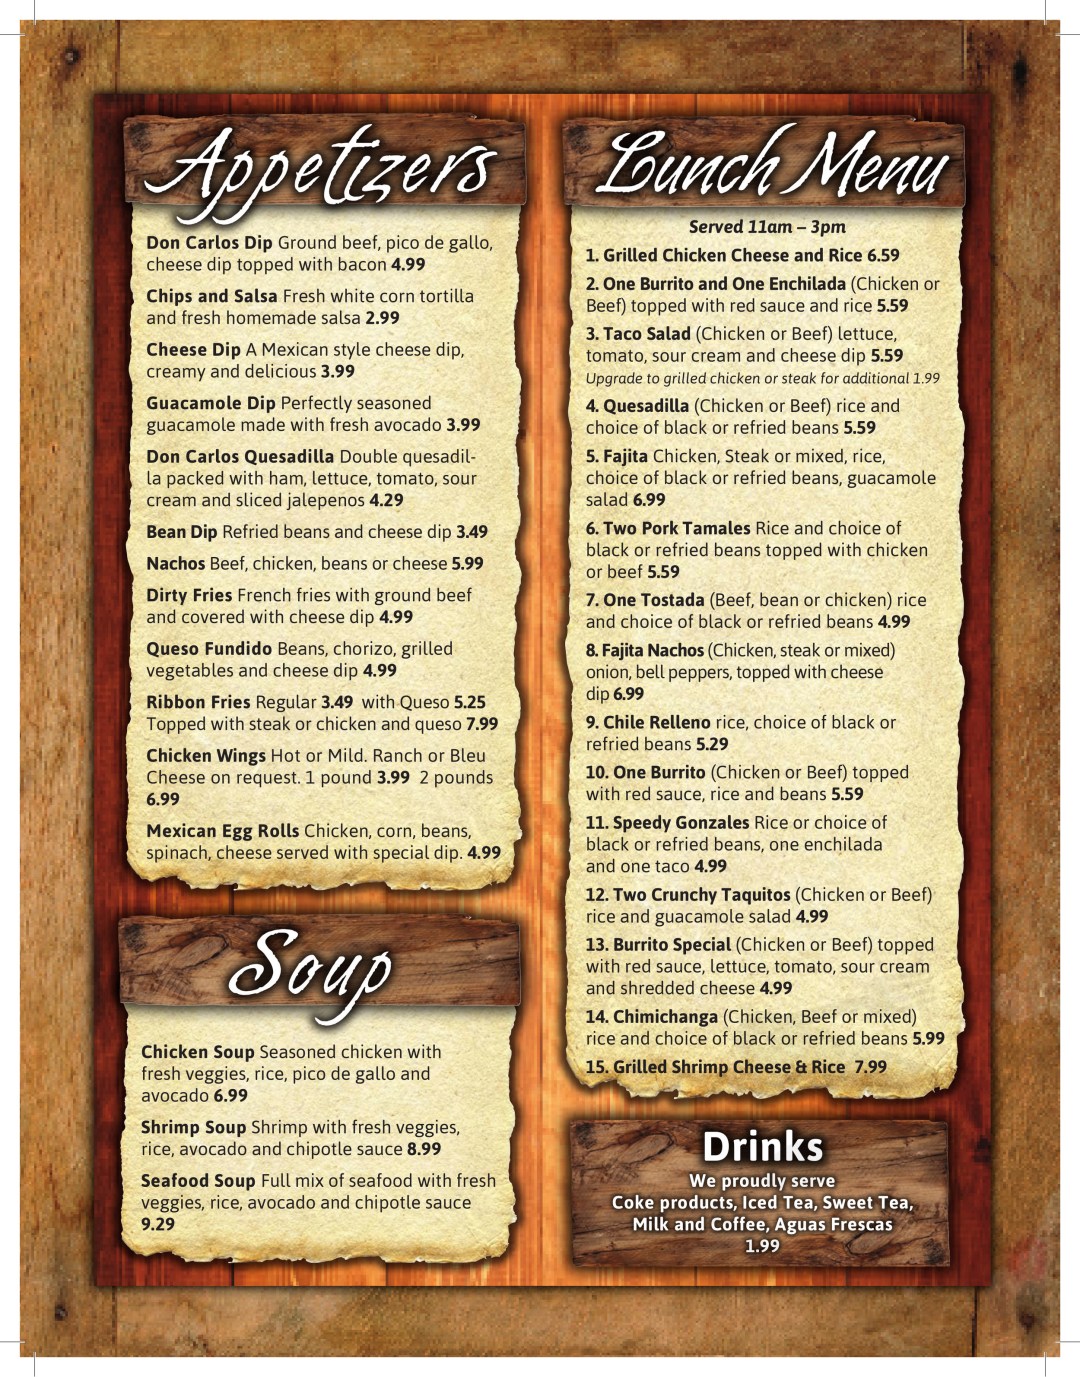 Picture of: Don Carlos Authentic Mexican Restaurant menu in Chaffee, Missouri, USA